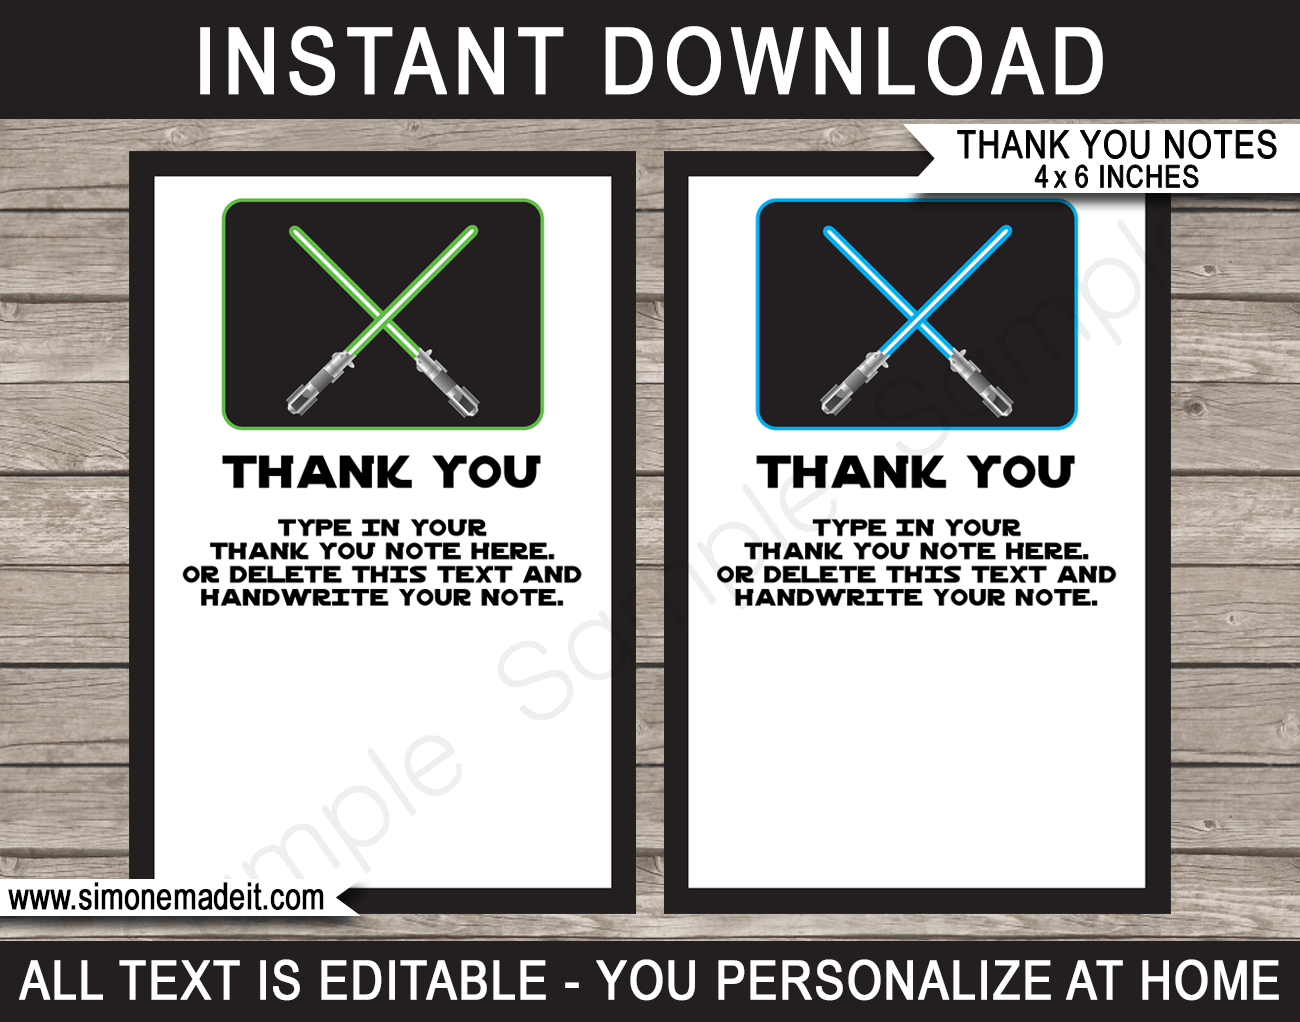 Printable Star Wars Party Thank You Cards Template - Star Wars Birthday theme - Editable Text - Instant Download via simonemadeit.com